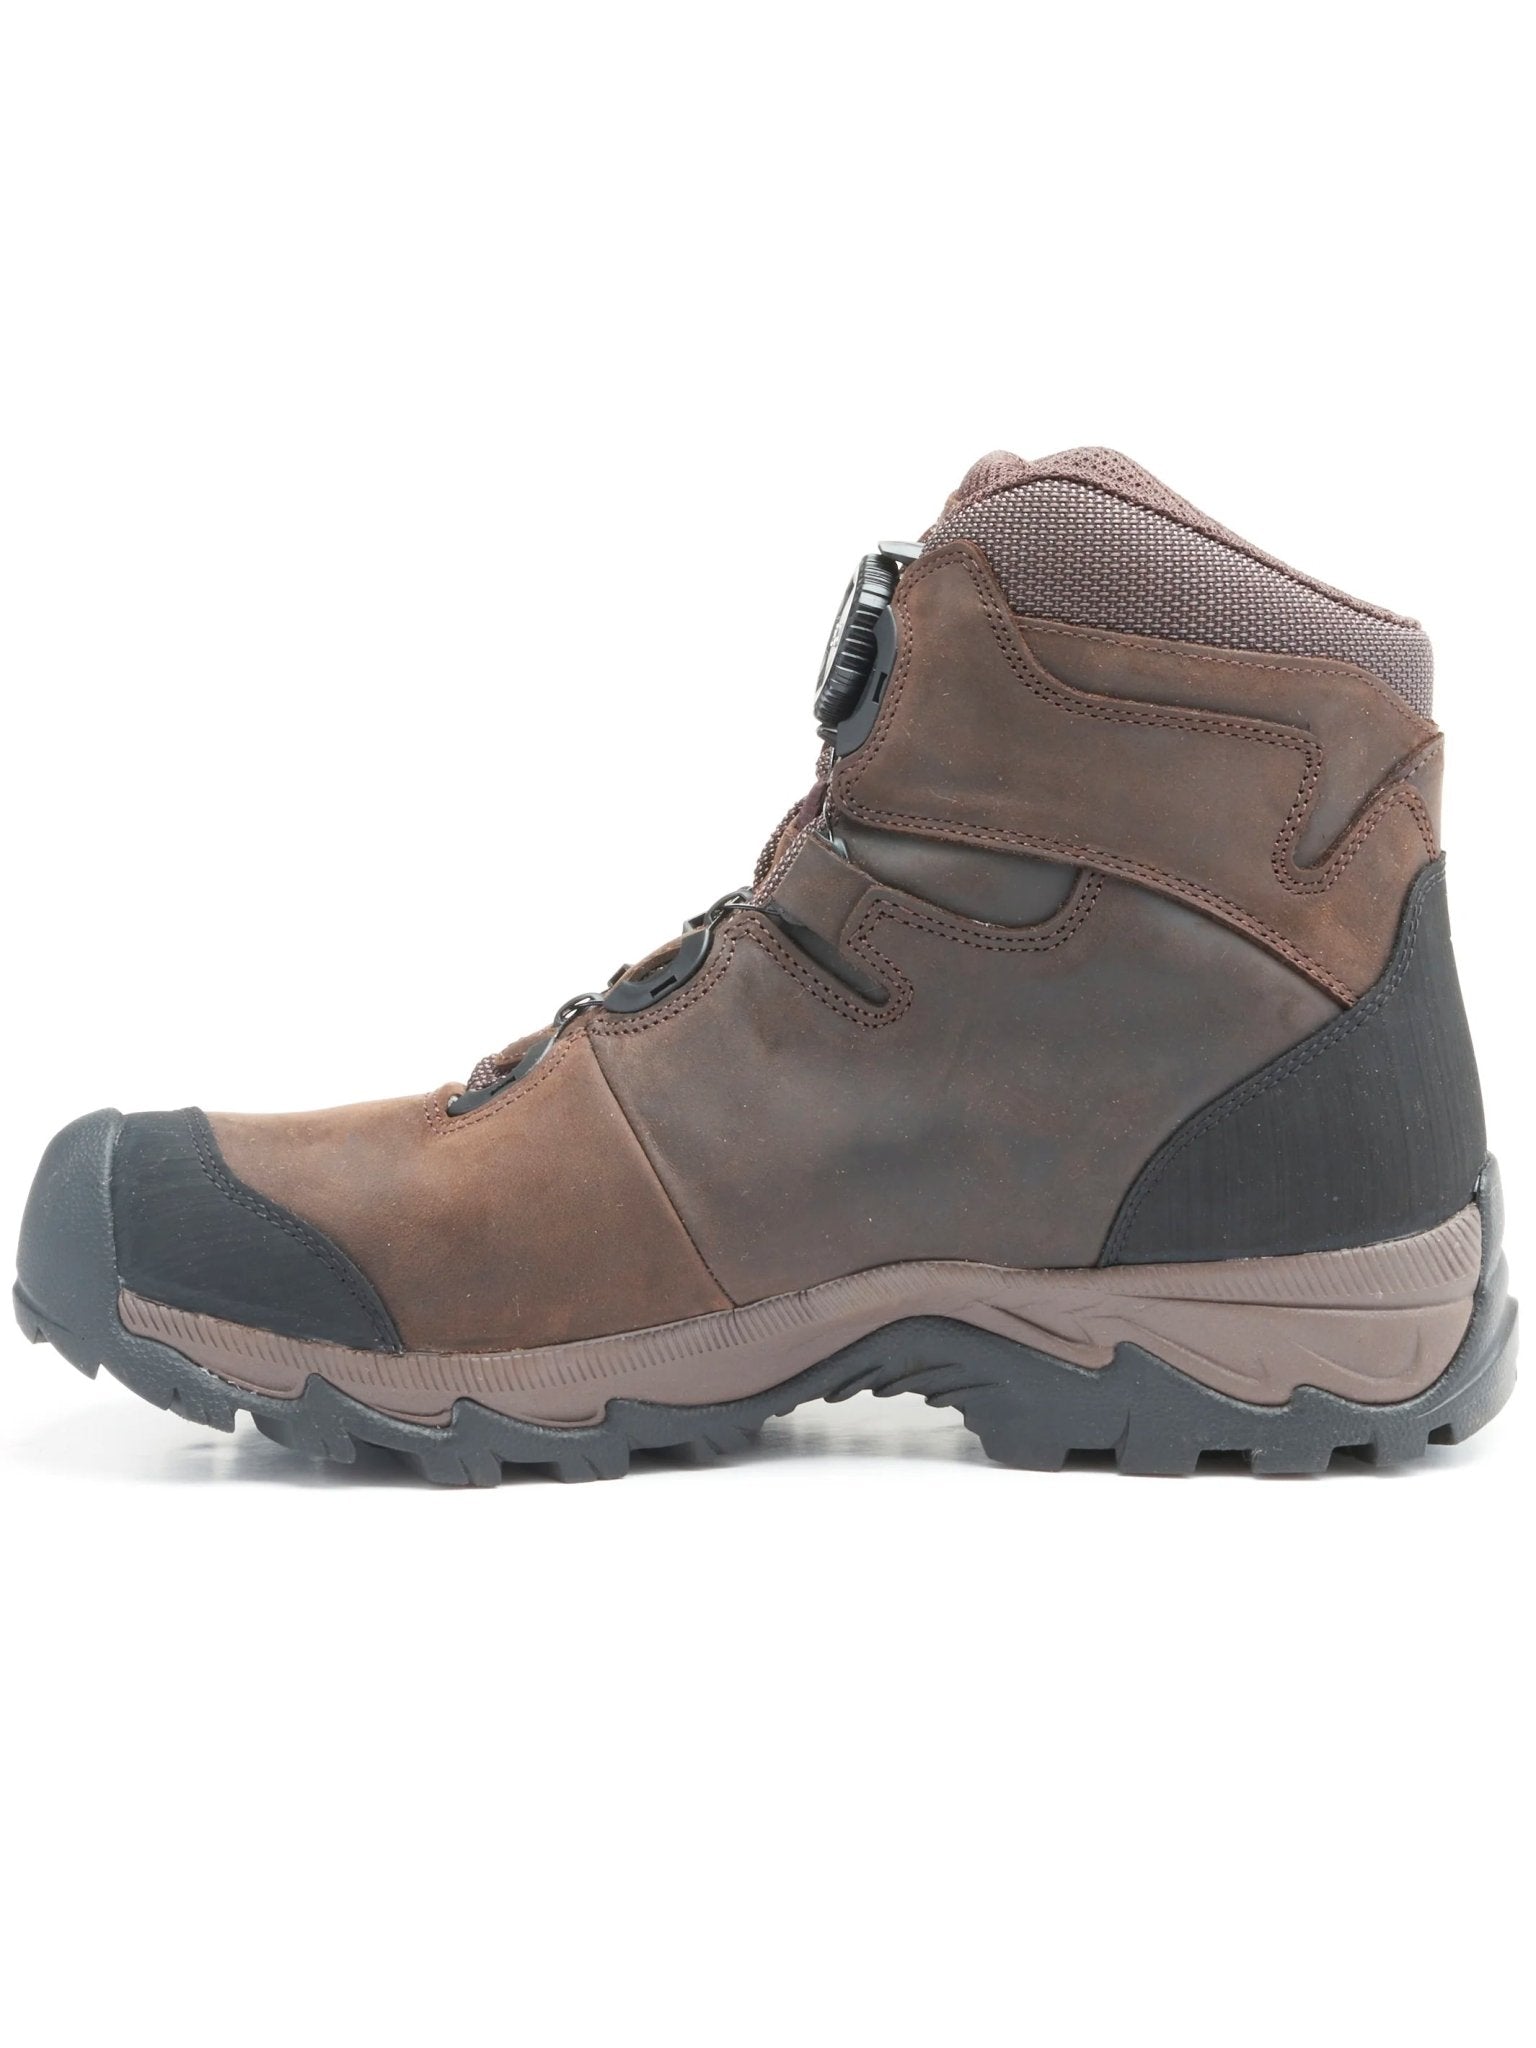 Treksta Treksta - Winchester 6" Gore - Tex Waterproof Boot, Boa Lace up system, Leather boot with Nestfit and Icelock Boots